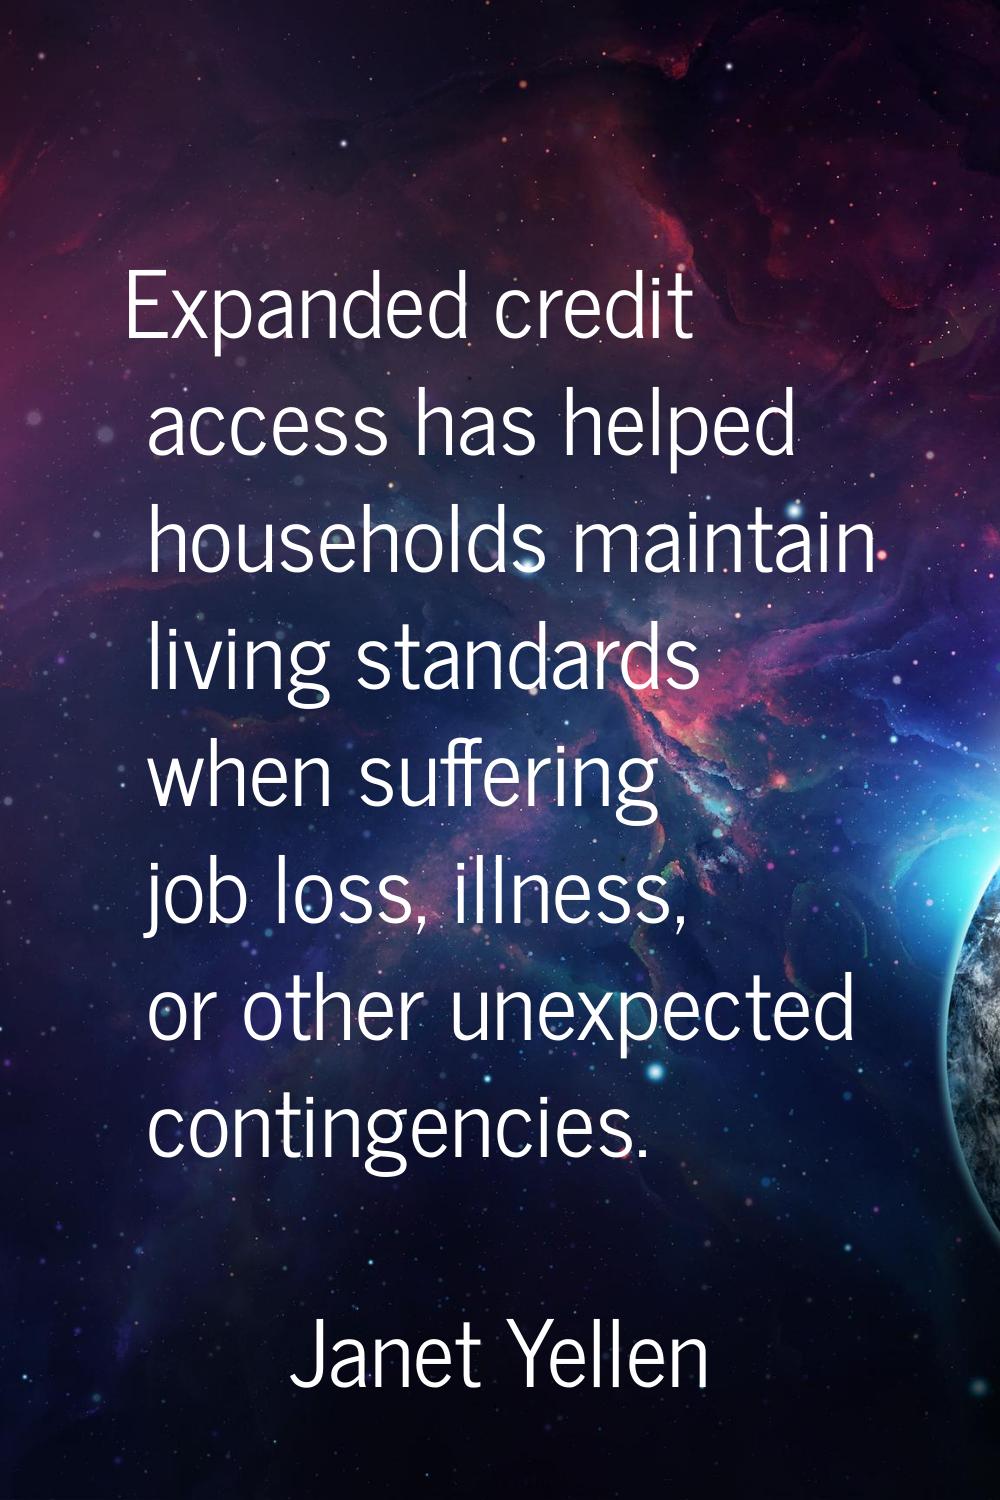 Expanded credit access has helped households maintain living standards when suffering job loss, ill